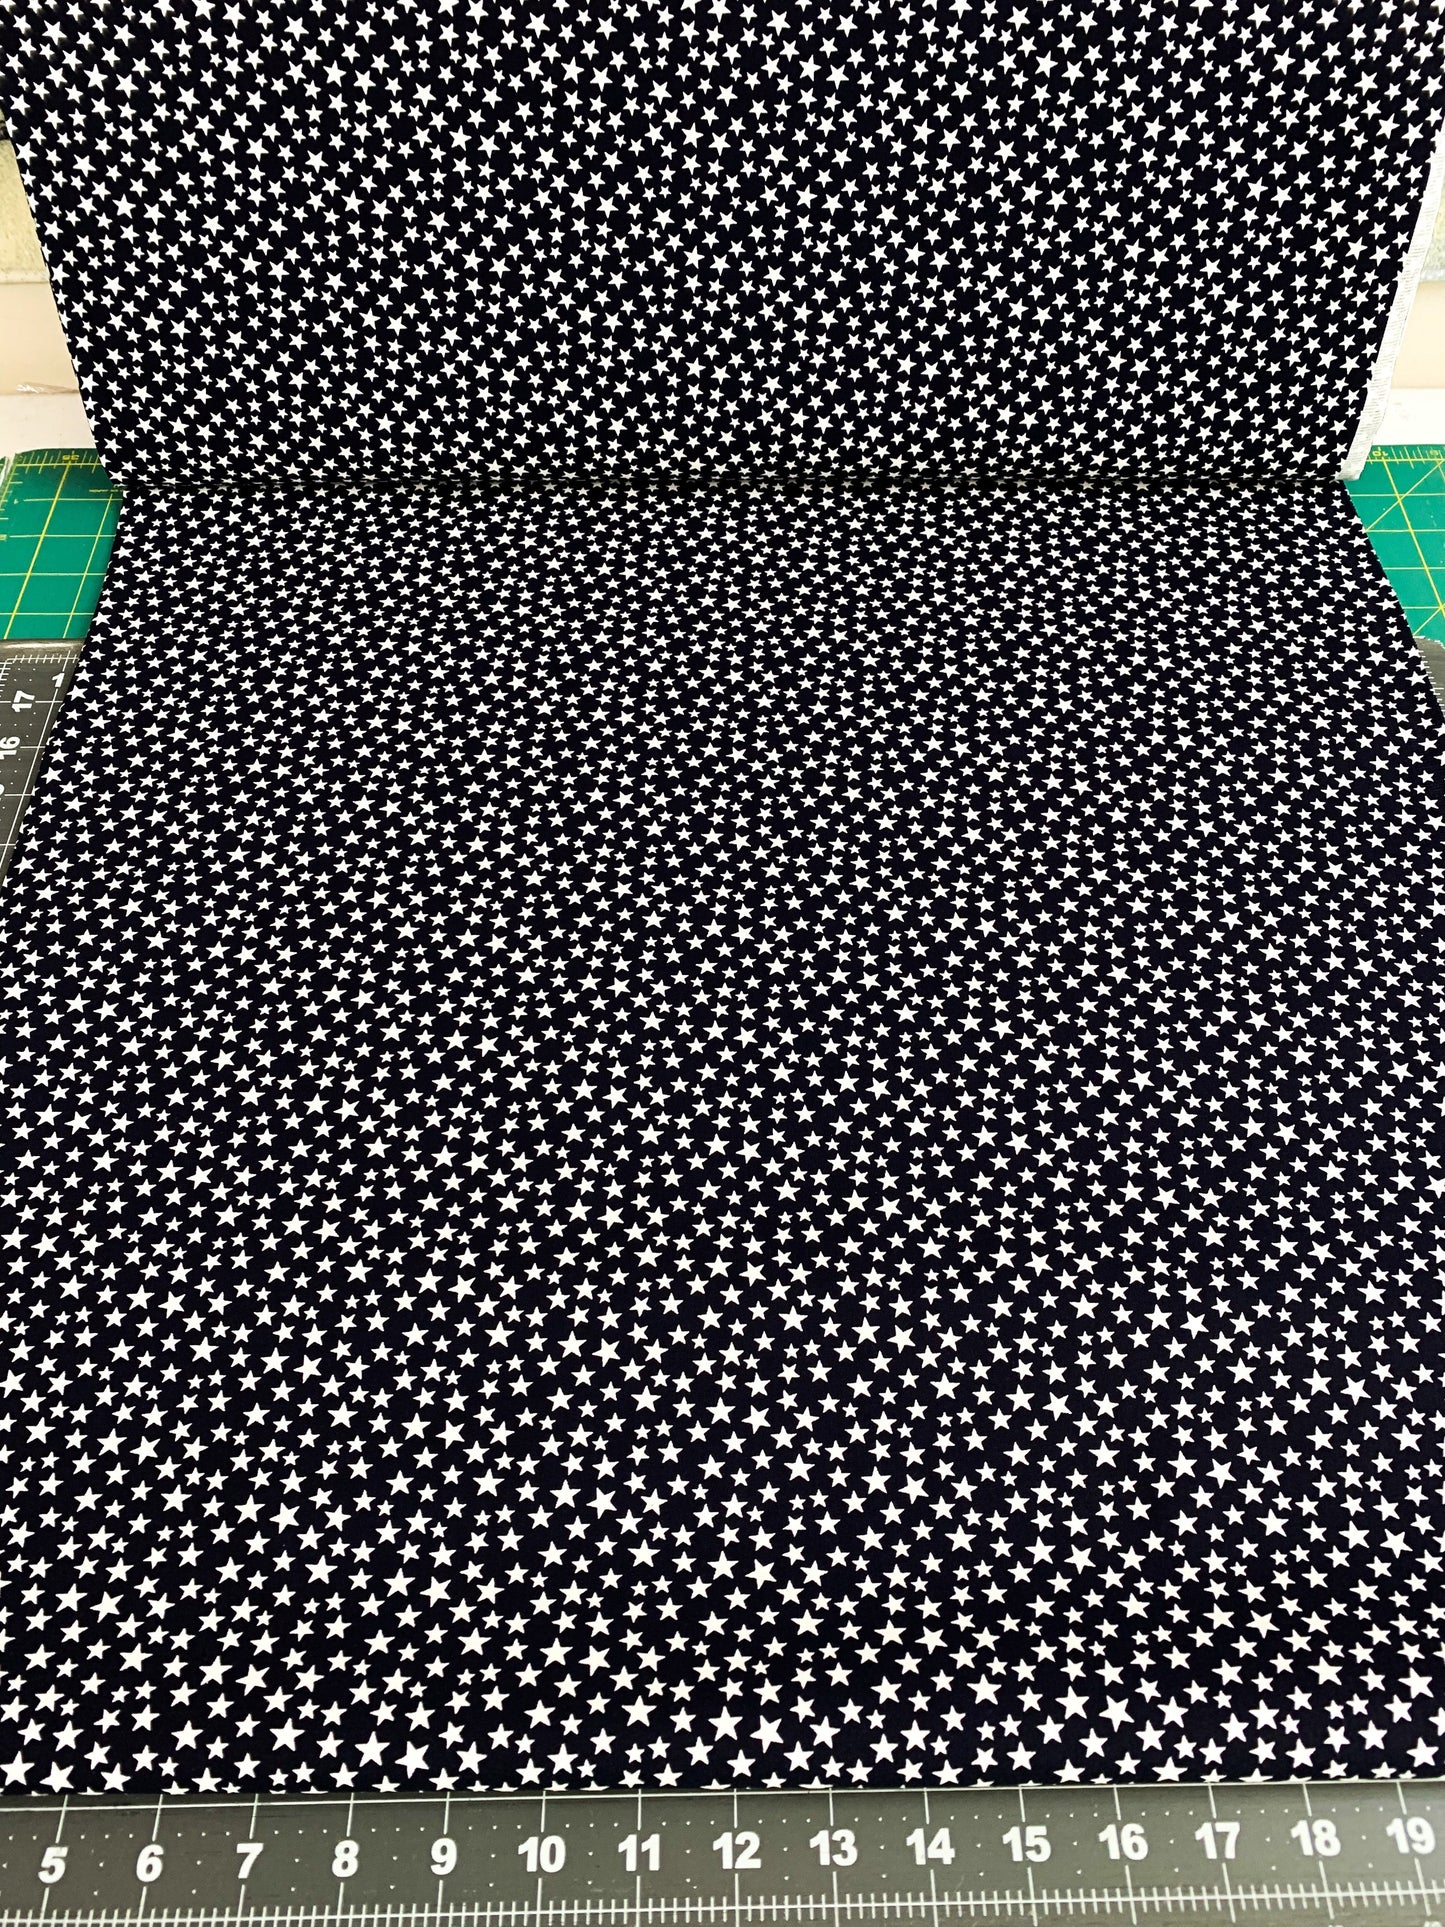 Navy Blue White Star USA fabric 48488 Made in the USA